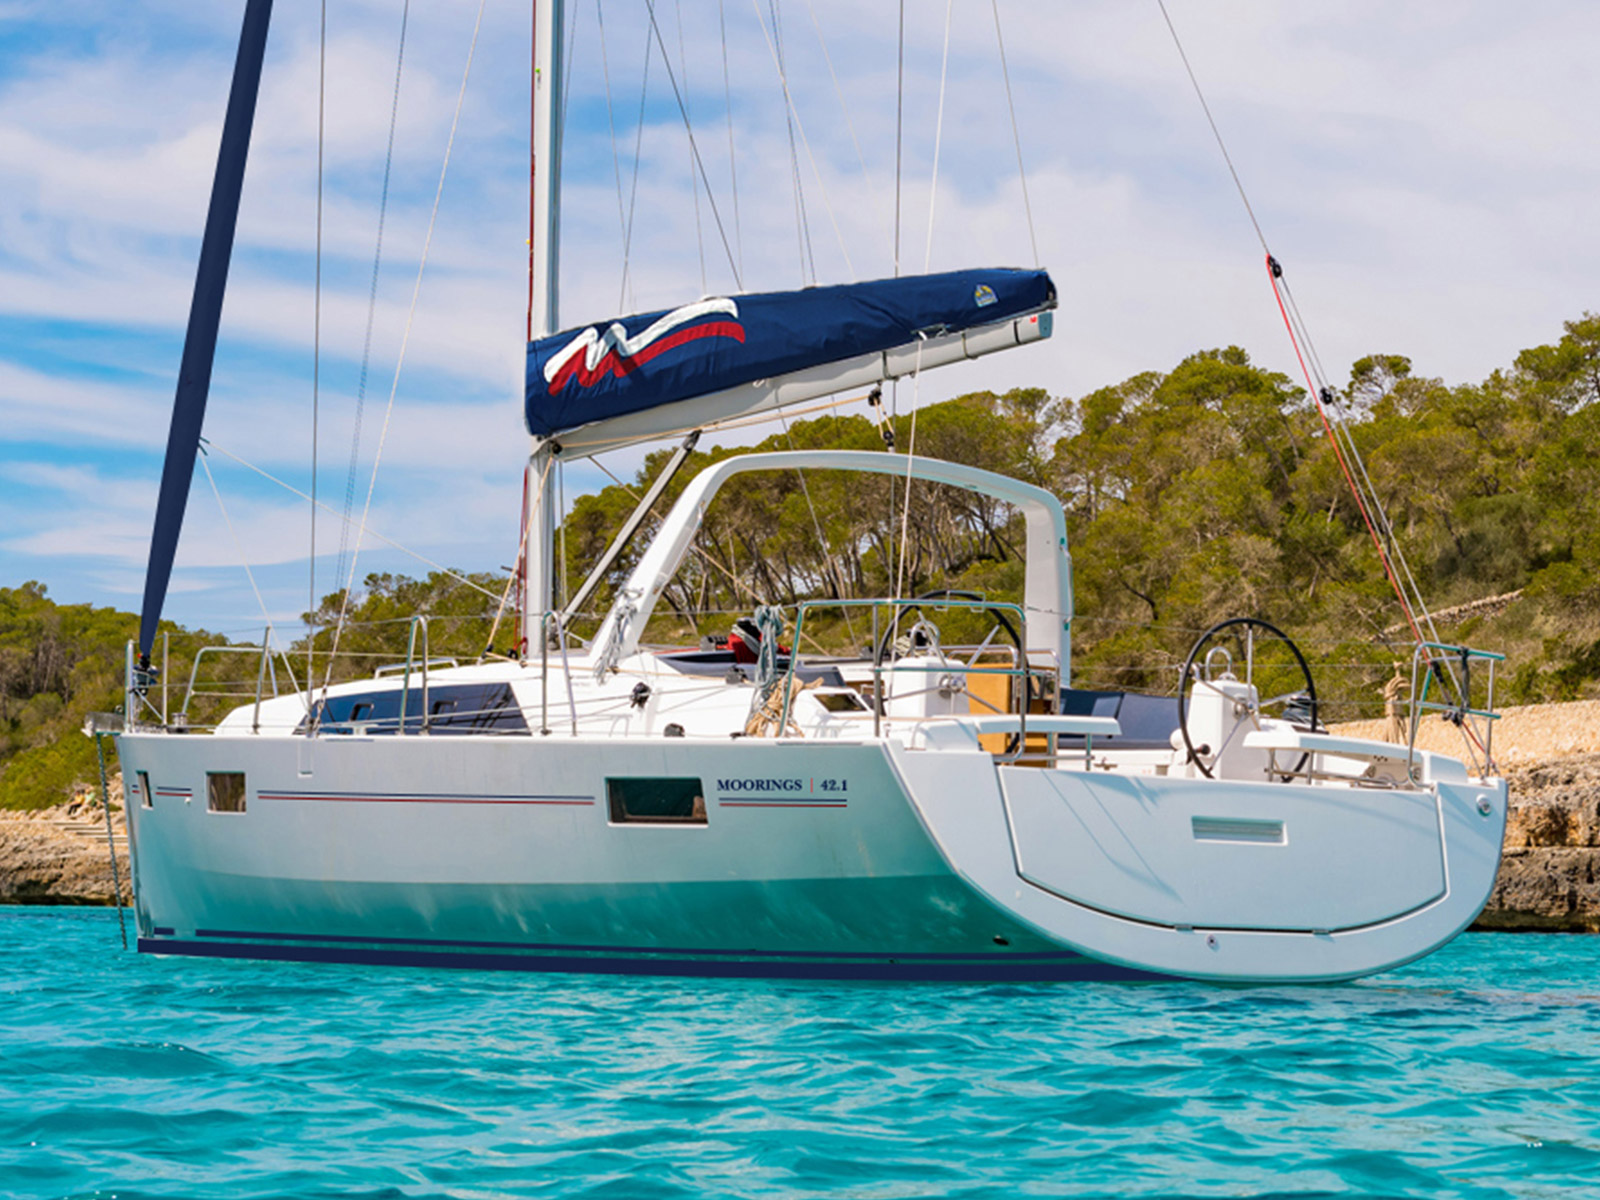 Oceanis 42 - Sailboat Charter Bahamas & Boat hire in Bahamas Abaco Islands Marsh Harbour TradeWinds Yacht Club 1